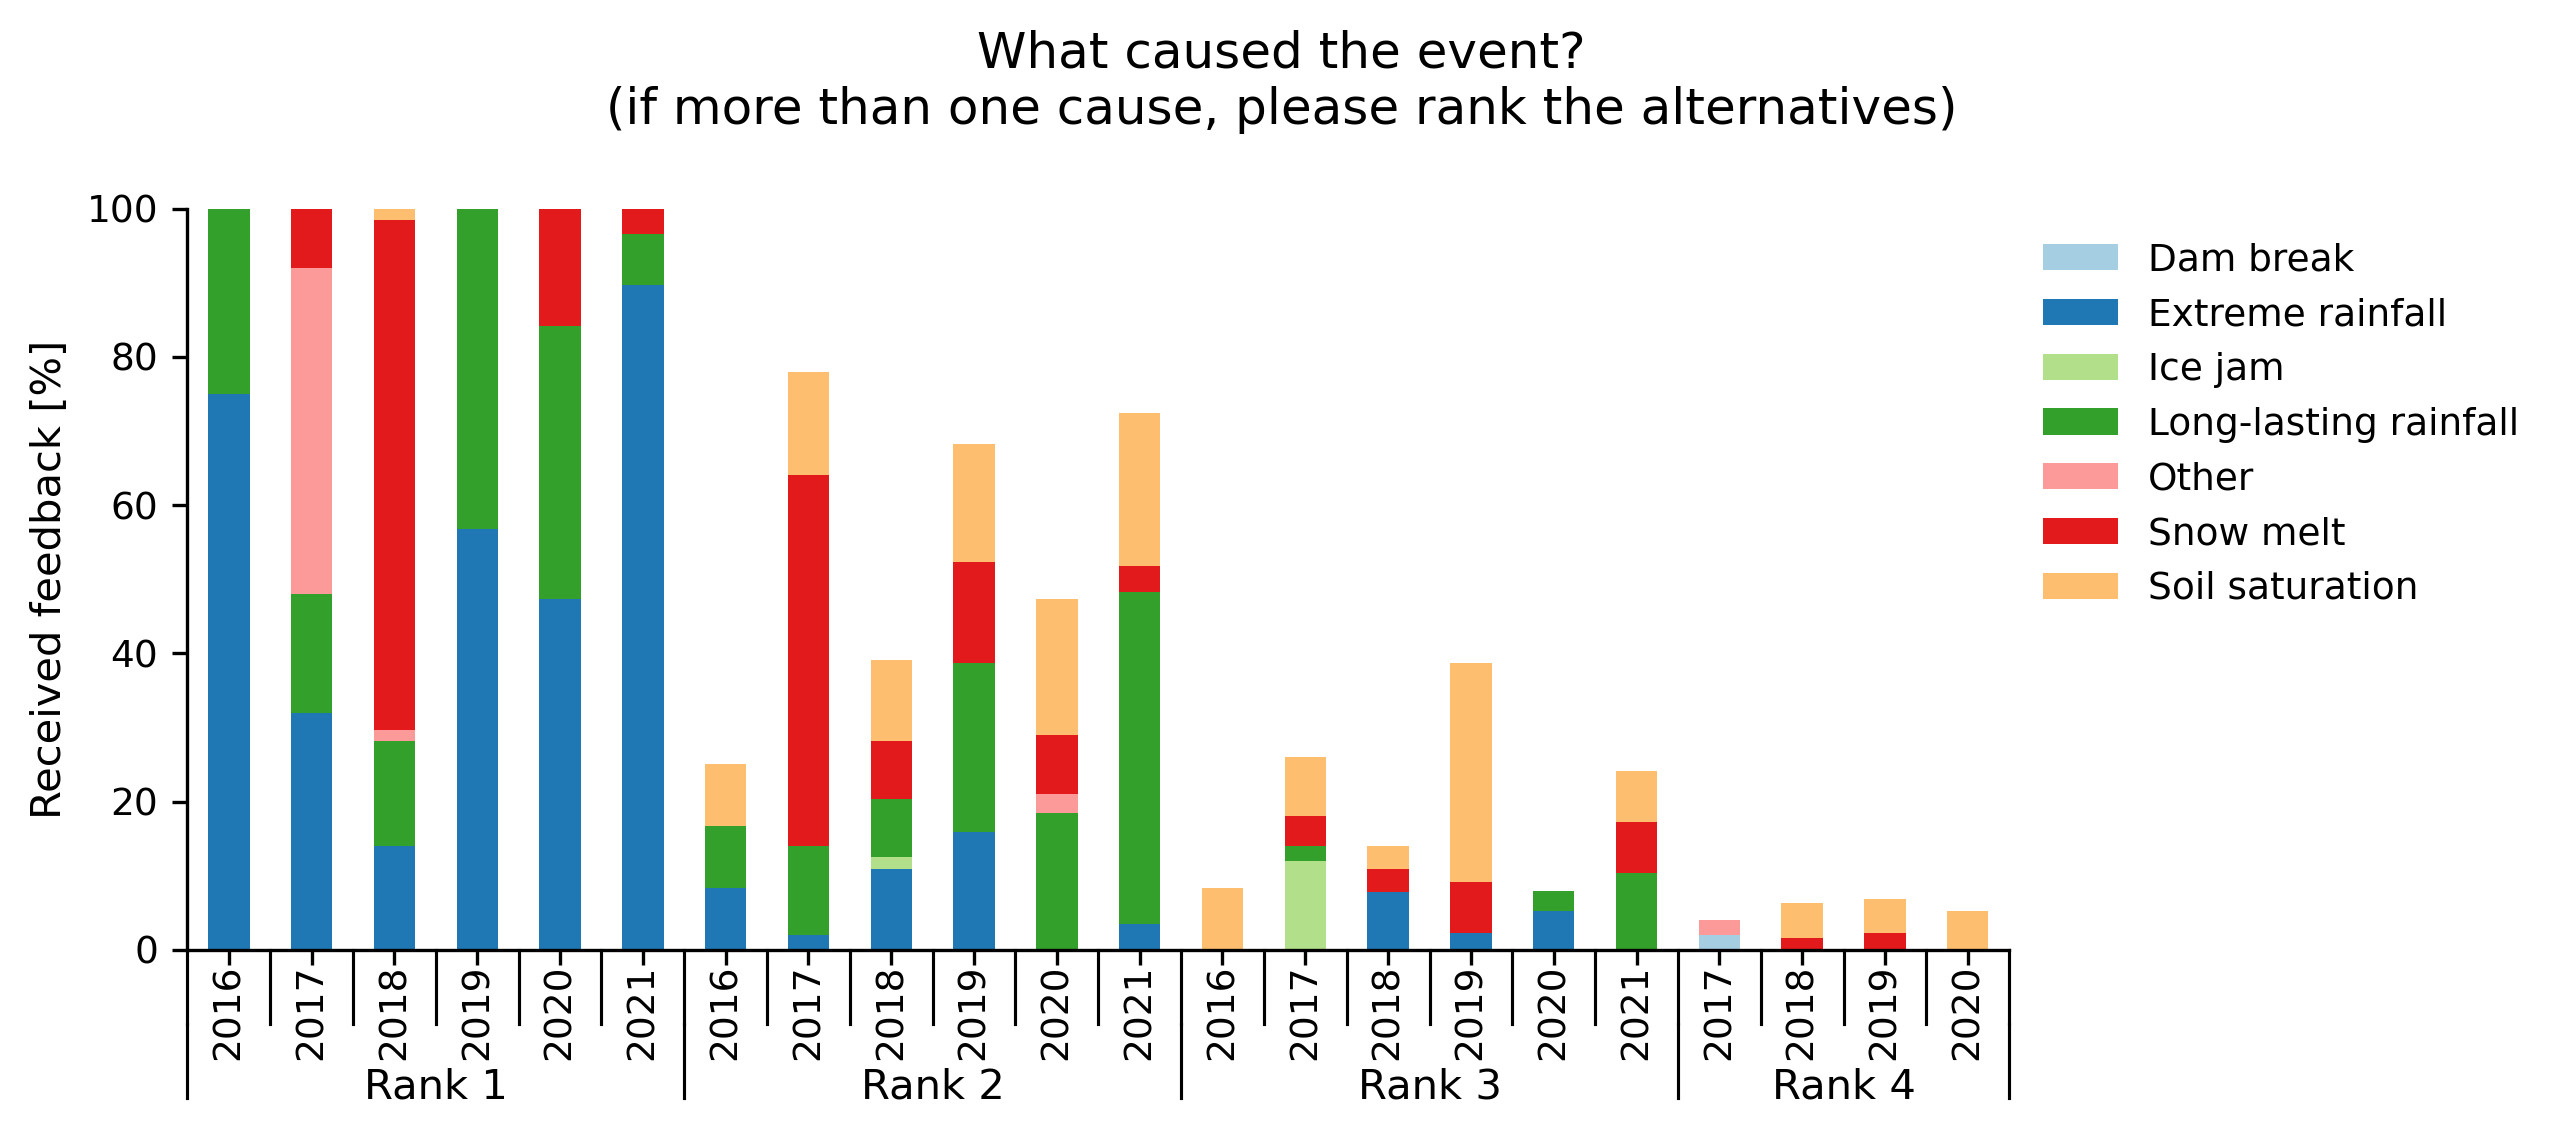 Figure 11. Partners' response to the question "What caused the flood event? If more than one cause, the alternatives are ranked from 1 to 4 (graph shows number of each cause and rank)." of the feedback survey.